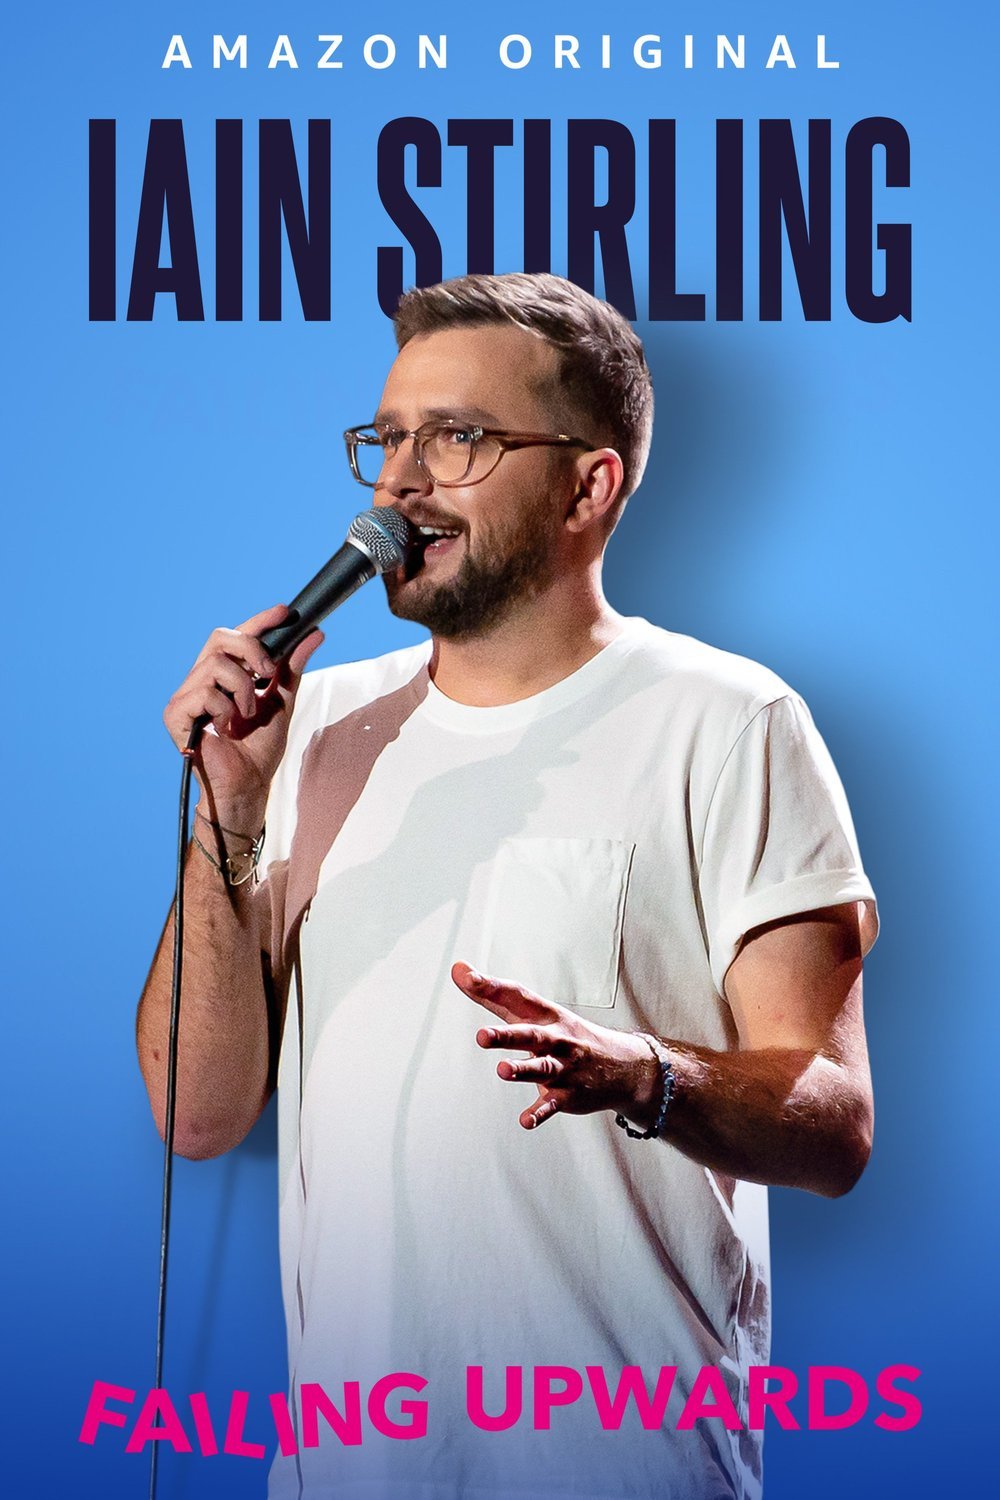 Poster of the movie Iain Stirling: Failing Upwards